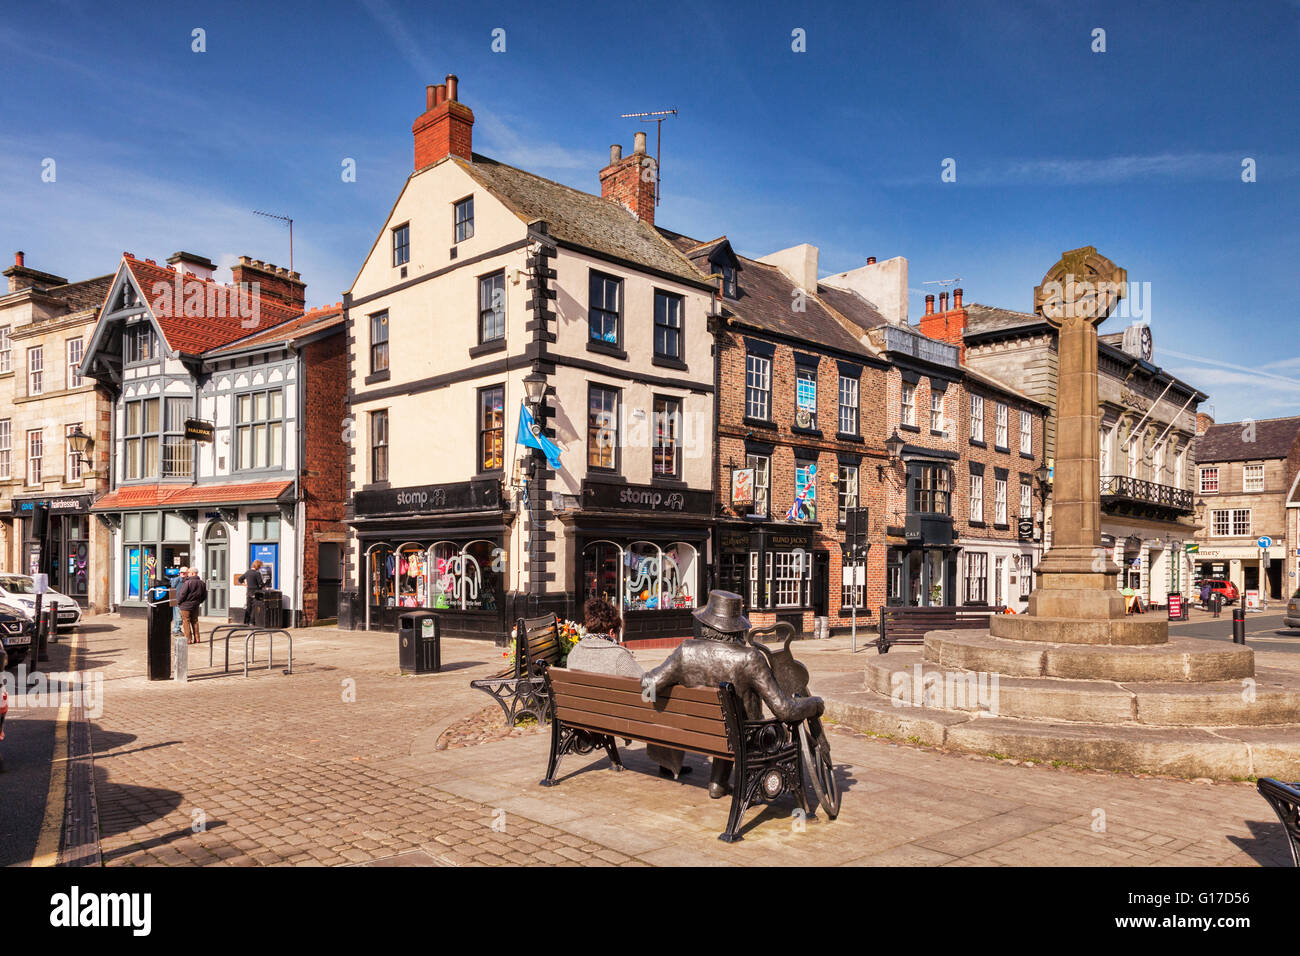 Knaresborough Market Square, with the statue of Blind Jack Metcalf and the Market Cross, Yorkshire Dales, North Yorkshire, Engla Stock Photo